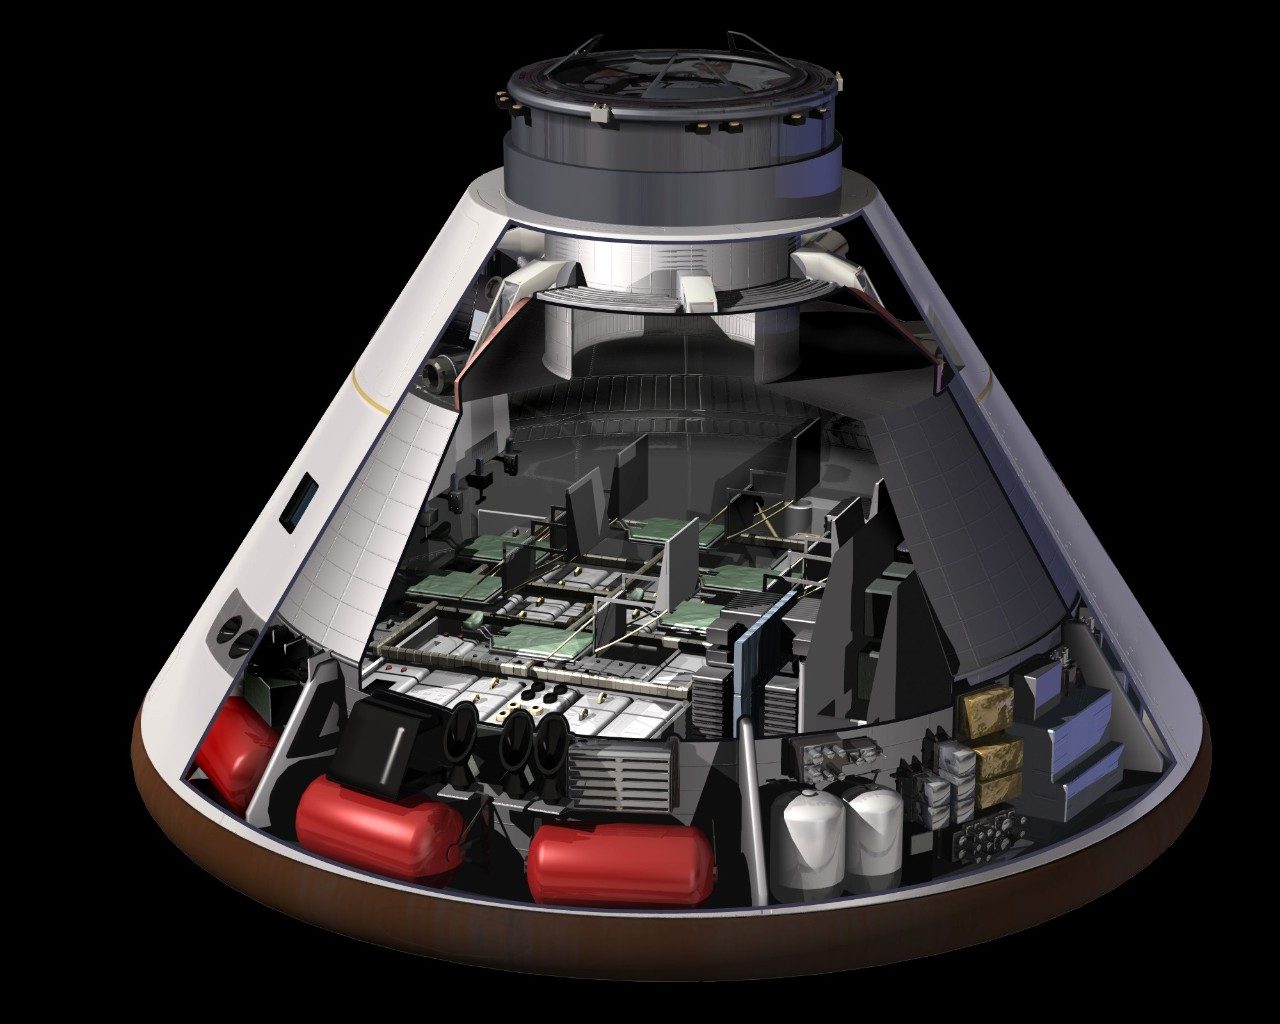 Cutaway image of Orion showing internal systems and technologies